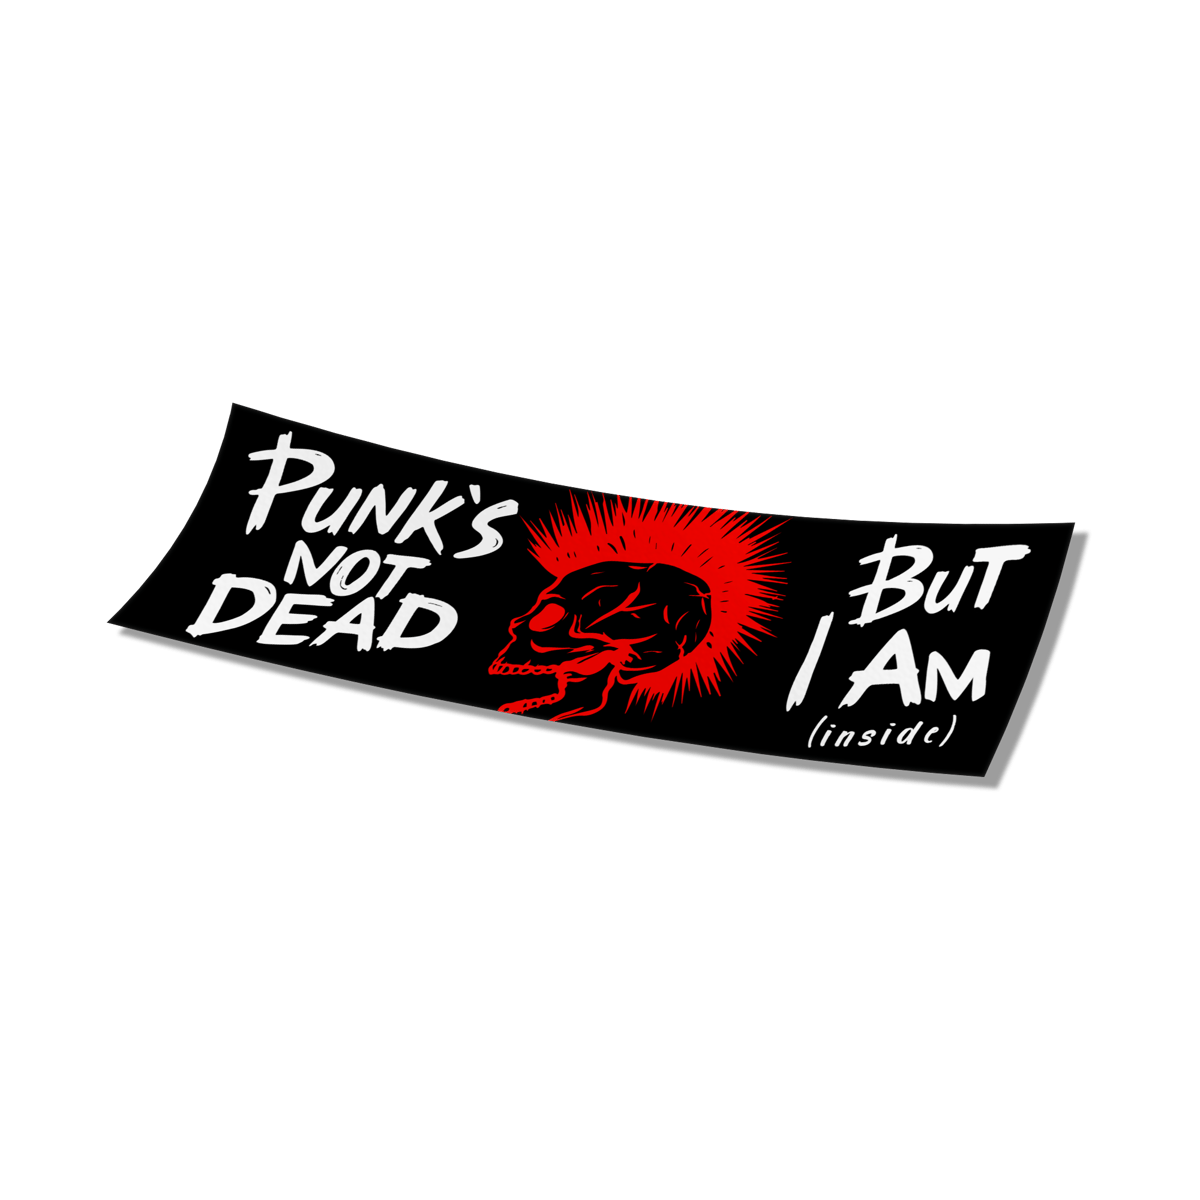 Image of Punk's Not Dead